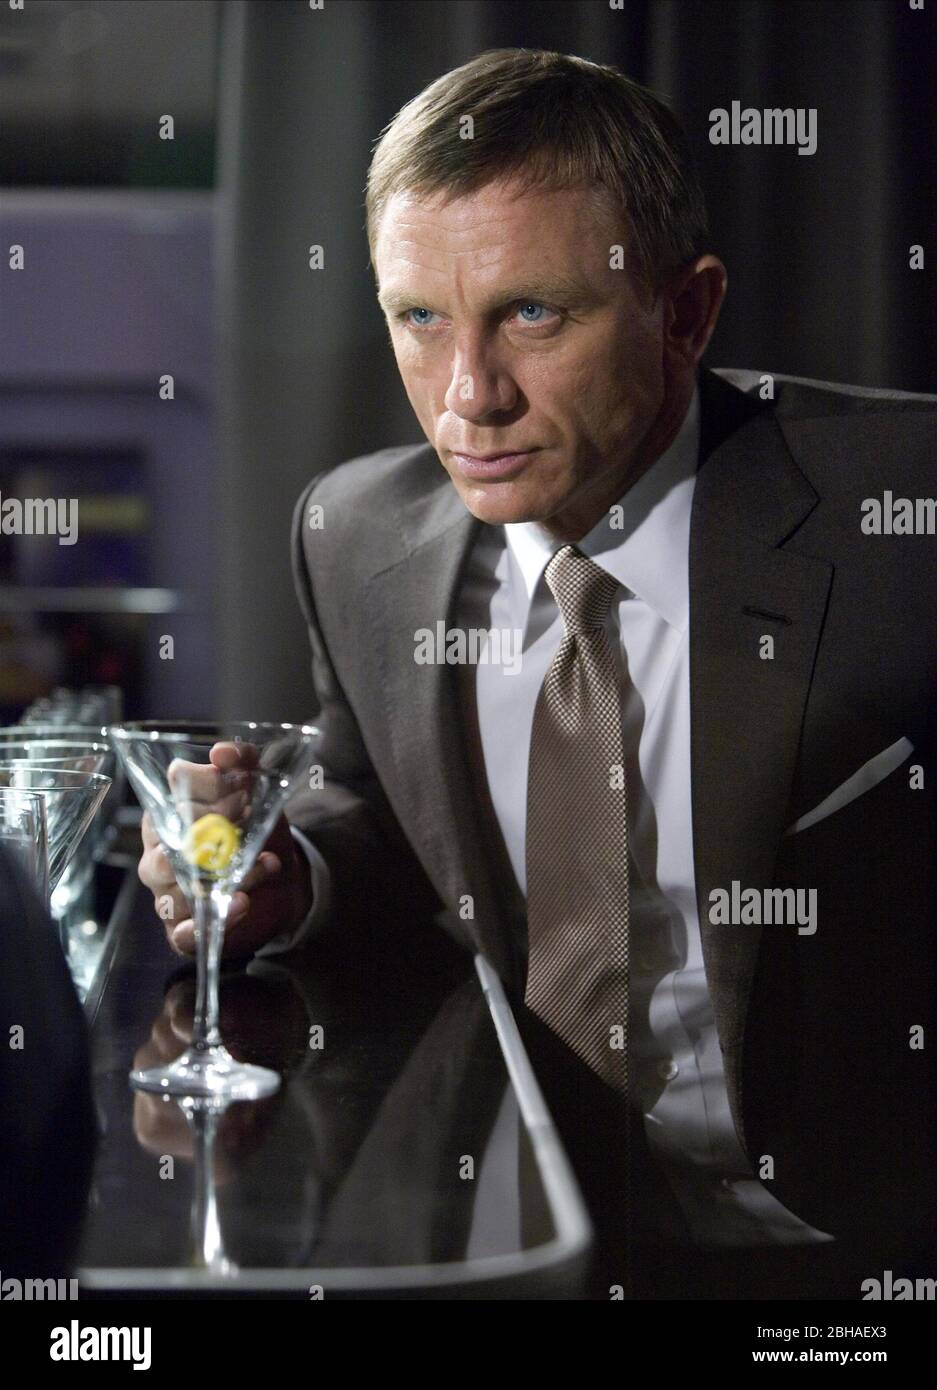 James Bond Martini High Resolution Stock Photography And Images Alamy,Puppy Vomiting Foam